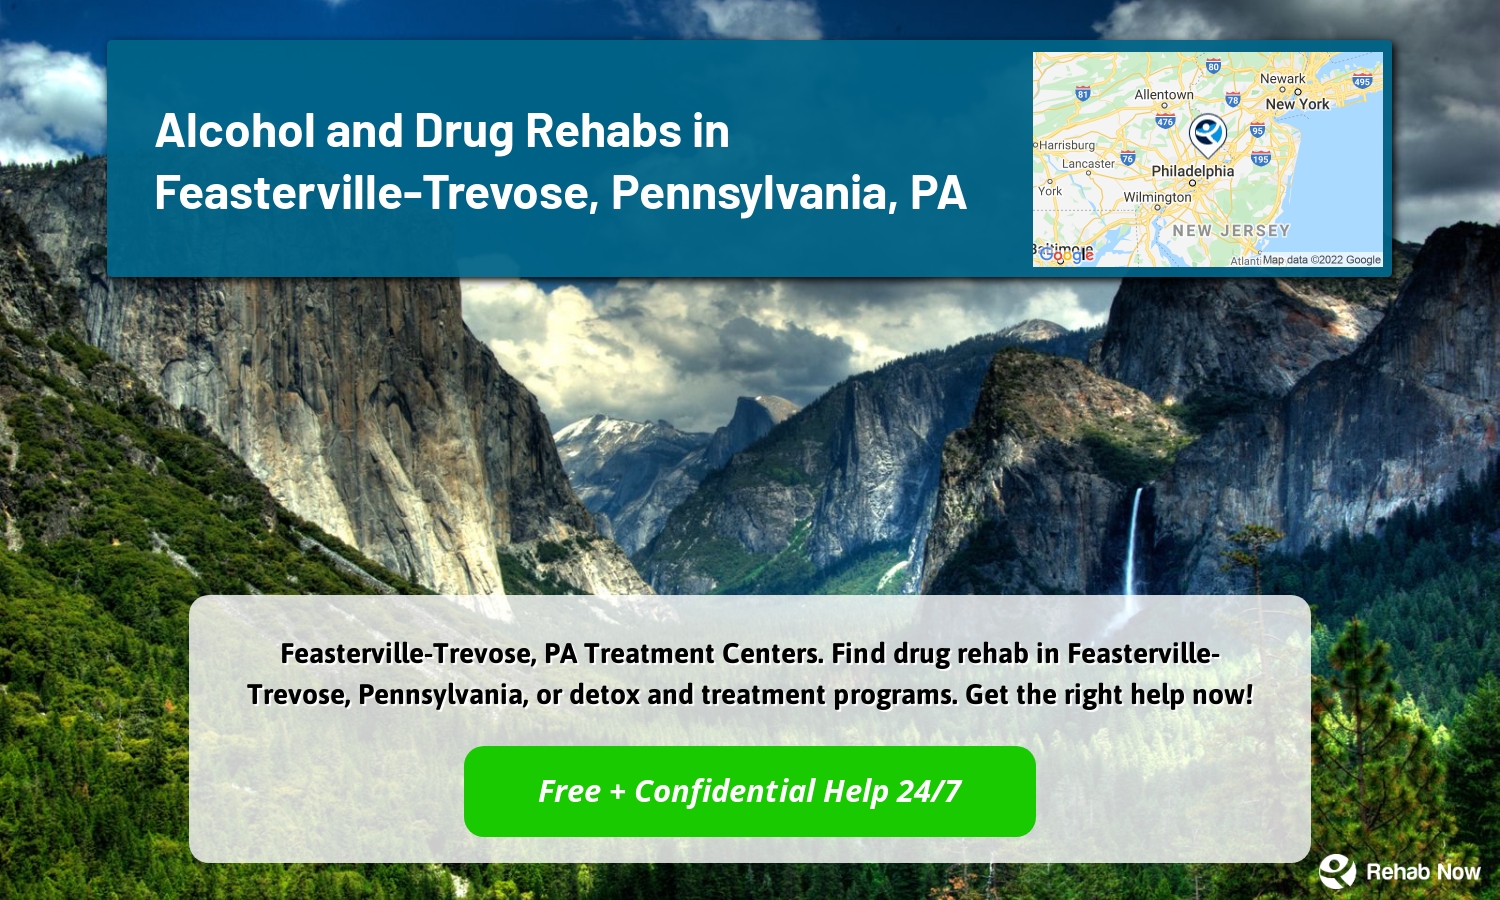 Feasterville-Trevose, PA Treatment Centers. Find drug rehab in Feasterville-Trevose, Pennsylvania, or detox and treatment programs. Get the right help now!